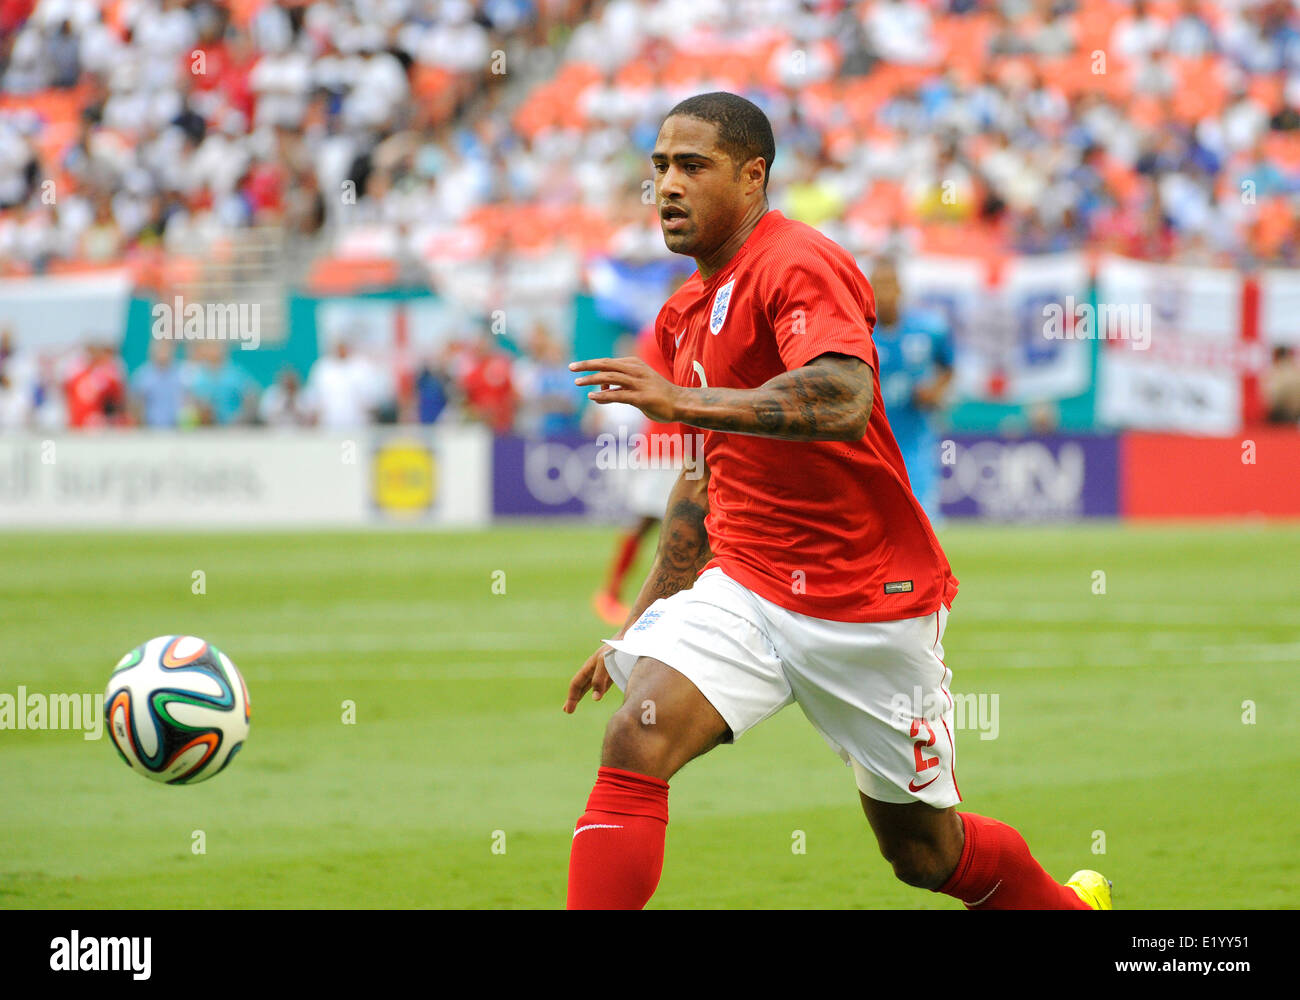 Florida, USA. 7th June, 2014. England Defender Glen Johnson (2) during an international friendly world cup warm up soccer match between England and Honduras at the Sun Life Stadium in Miami Gardens, Florida. © Action Plus Sports/Alamy Live News Stock Photo